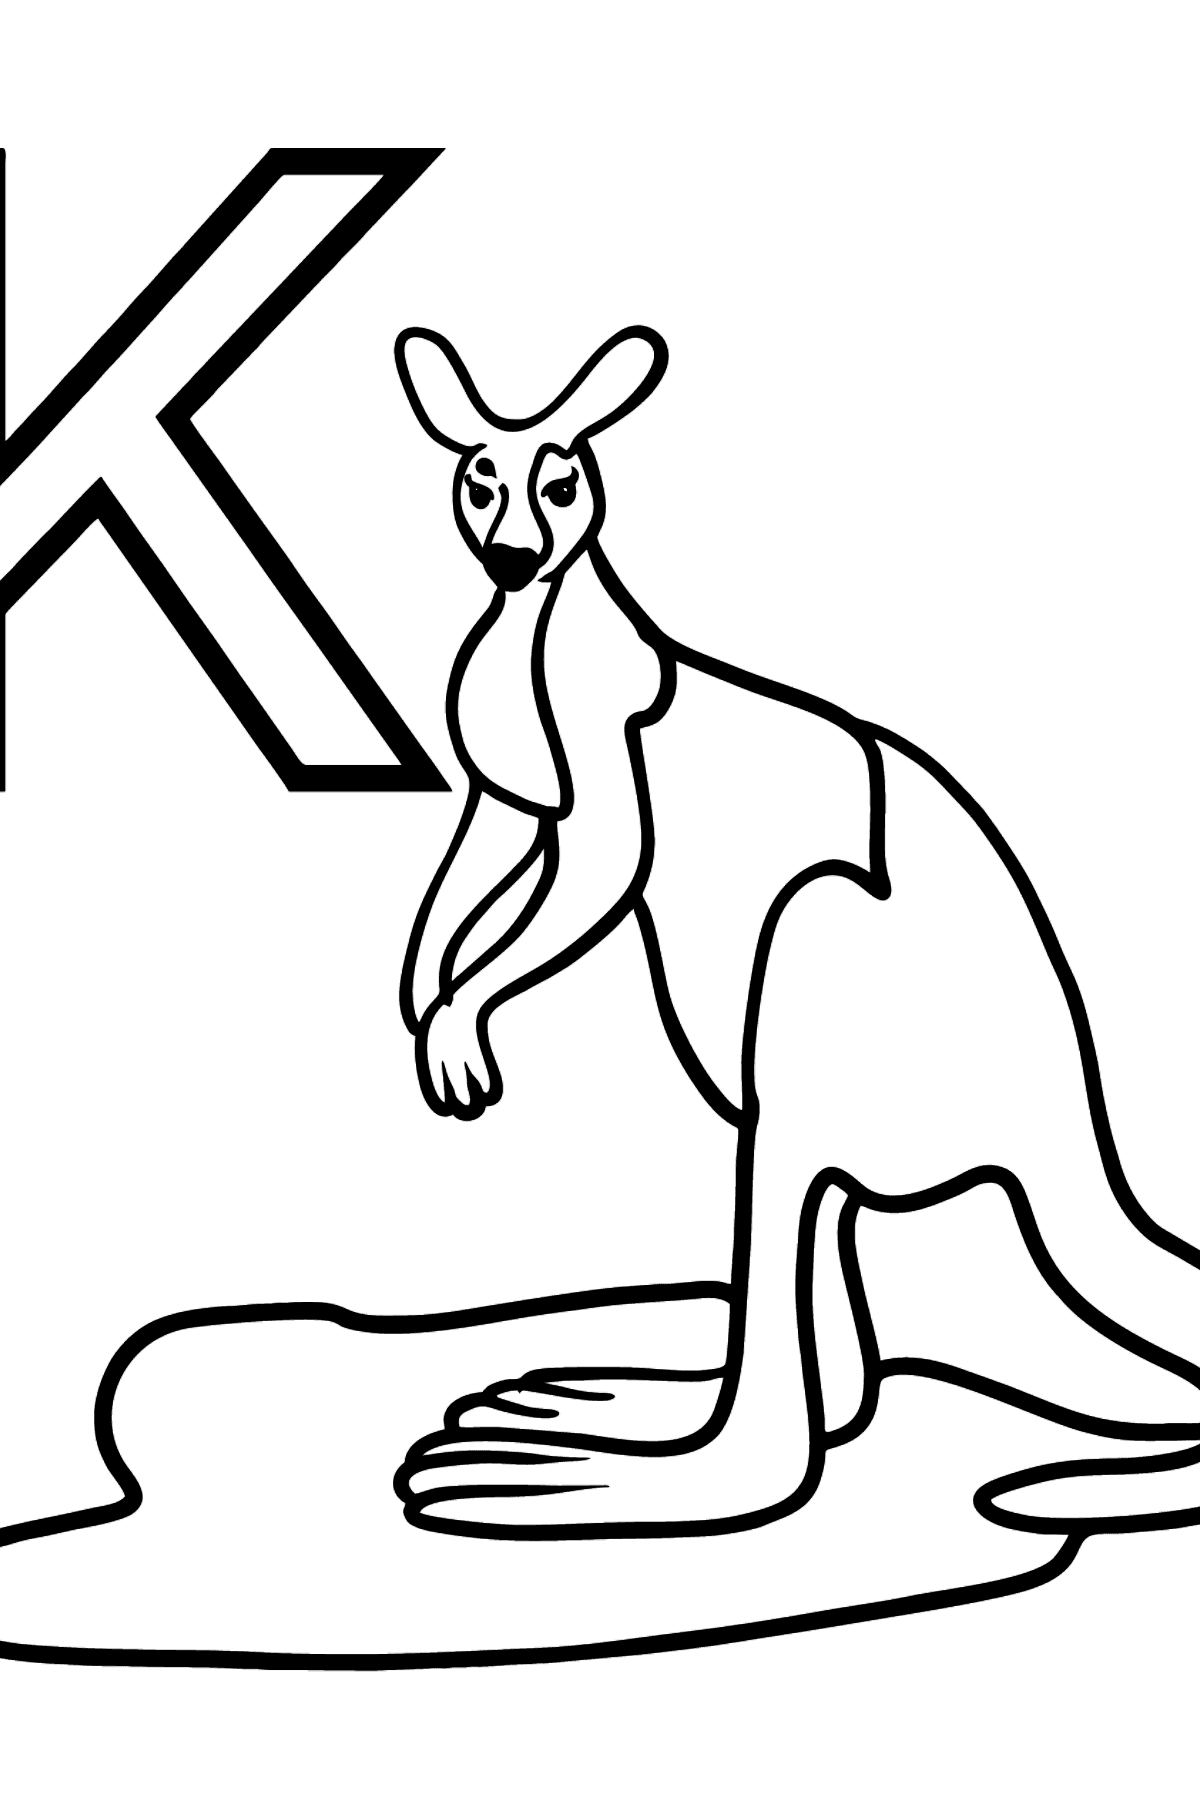 French Letter K coloring pages - KANGOUROU - Coloring Pages for Kids